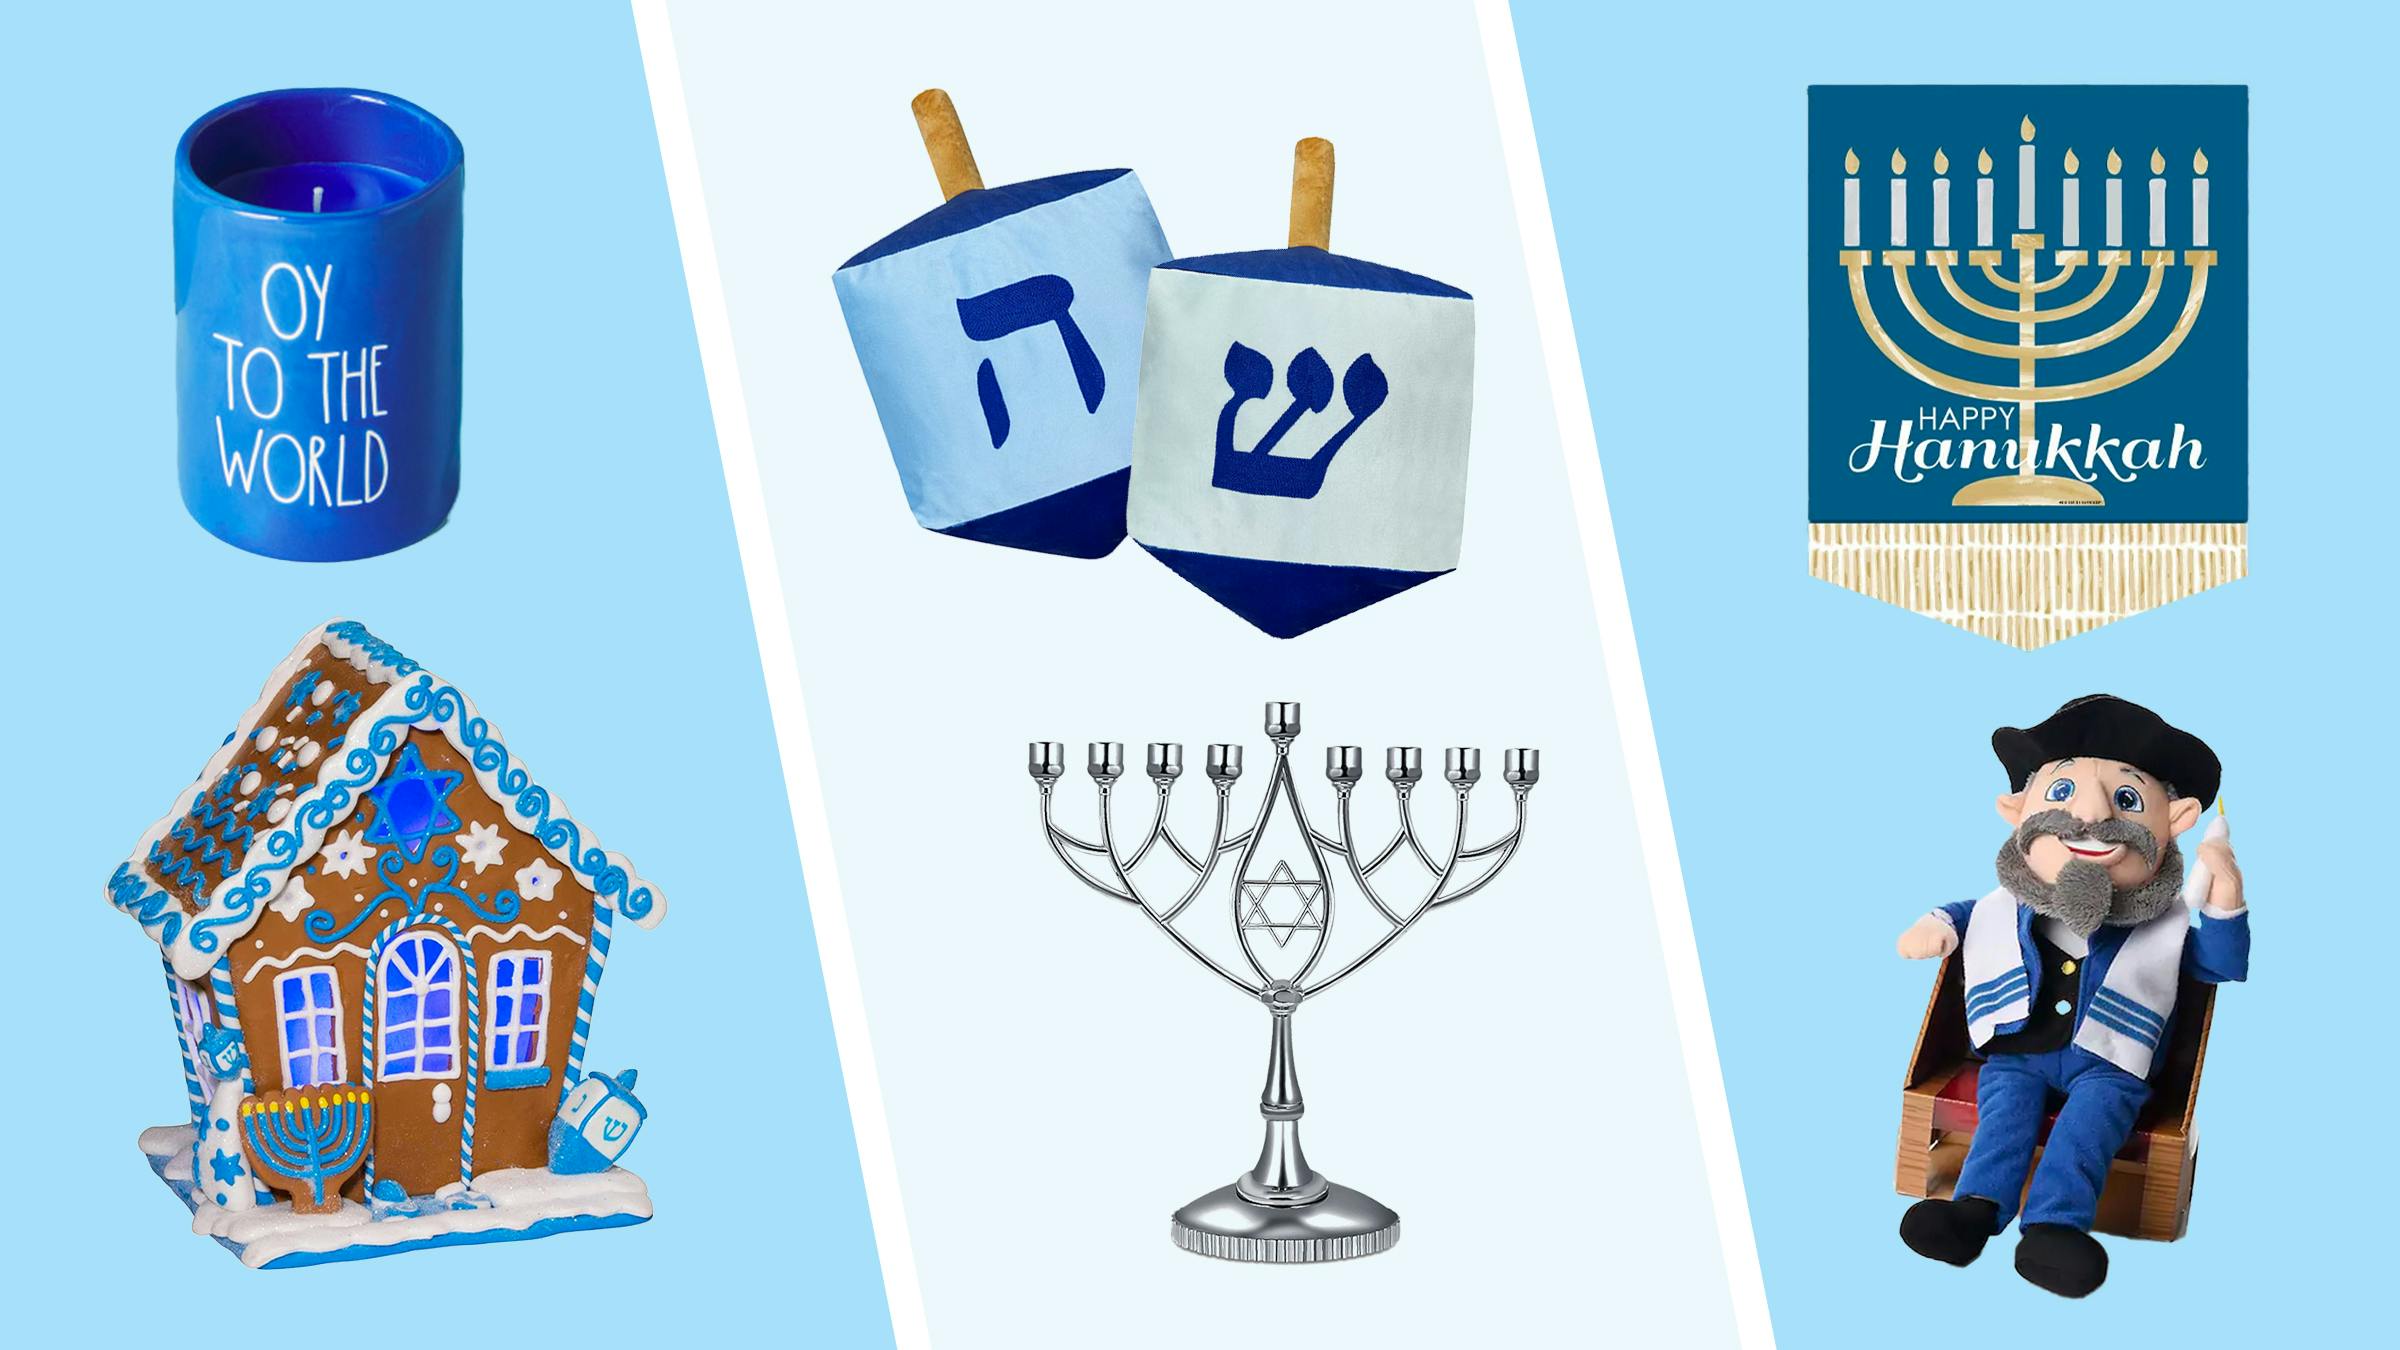 Hanukkah Decorations for a Light and Bright Holiday Season